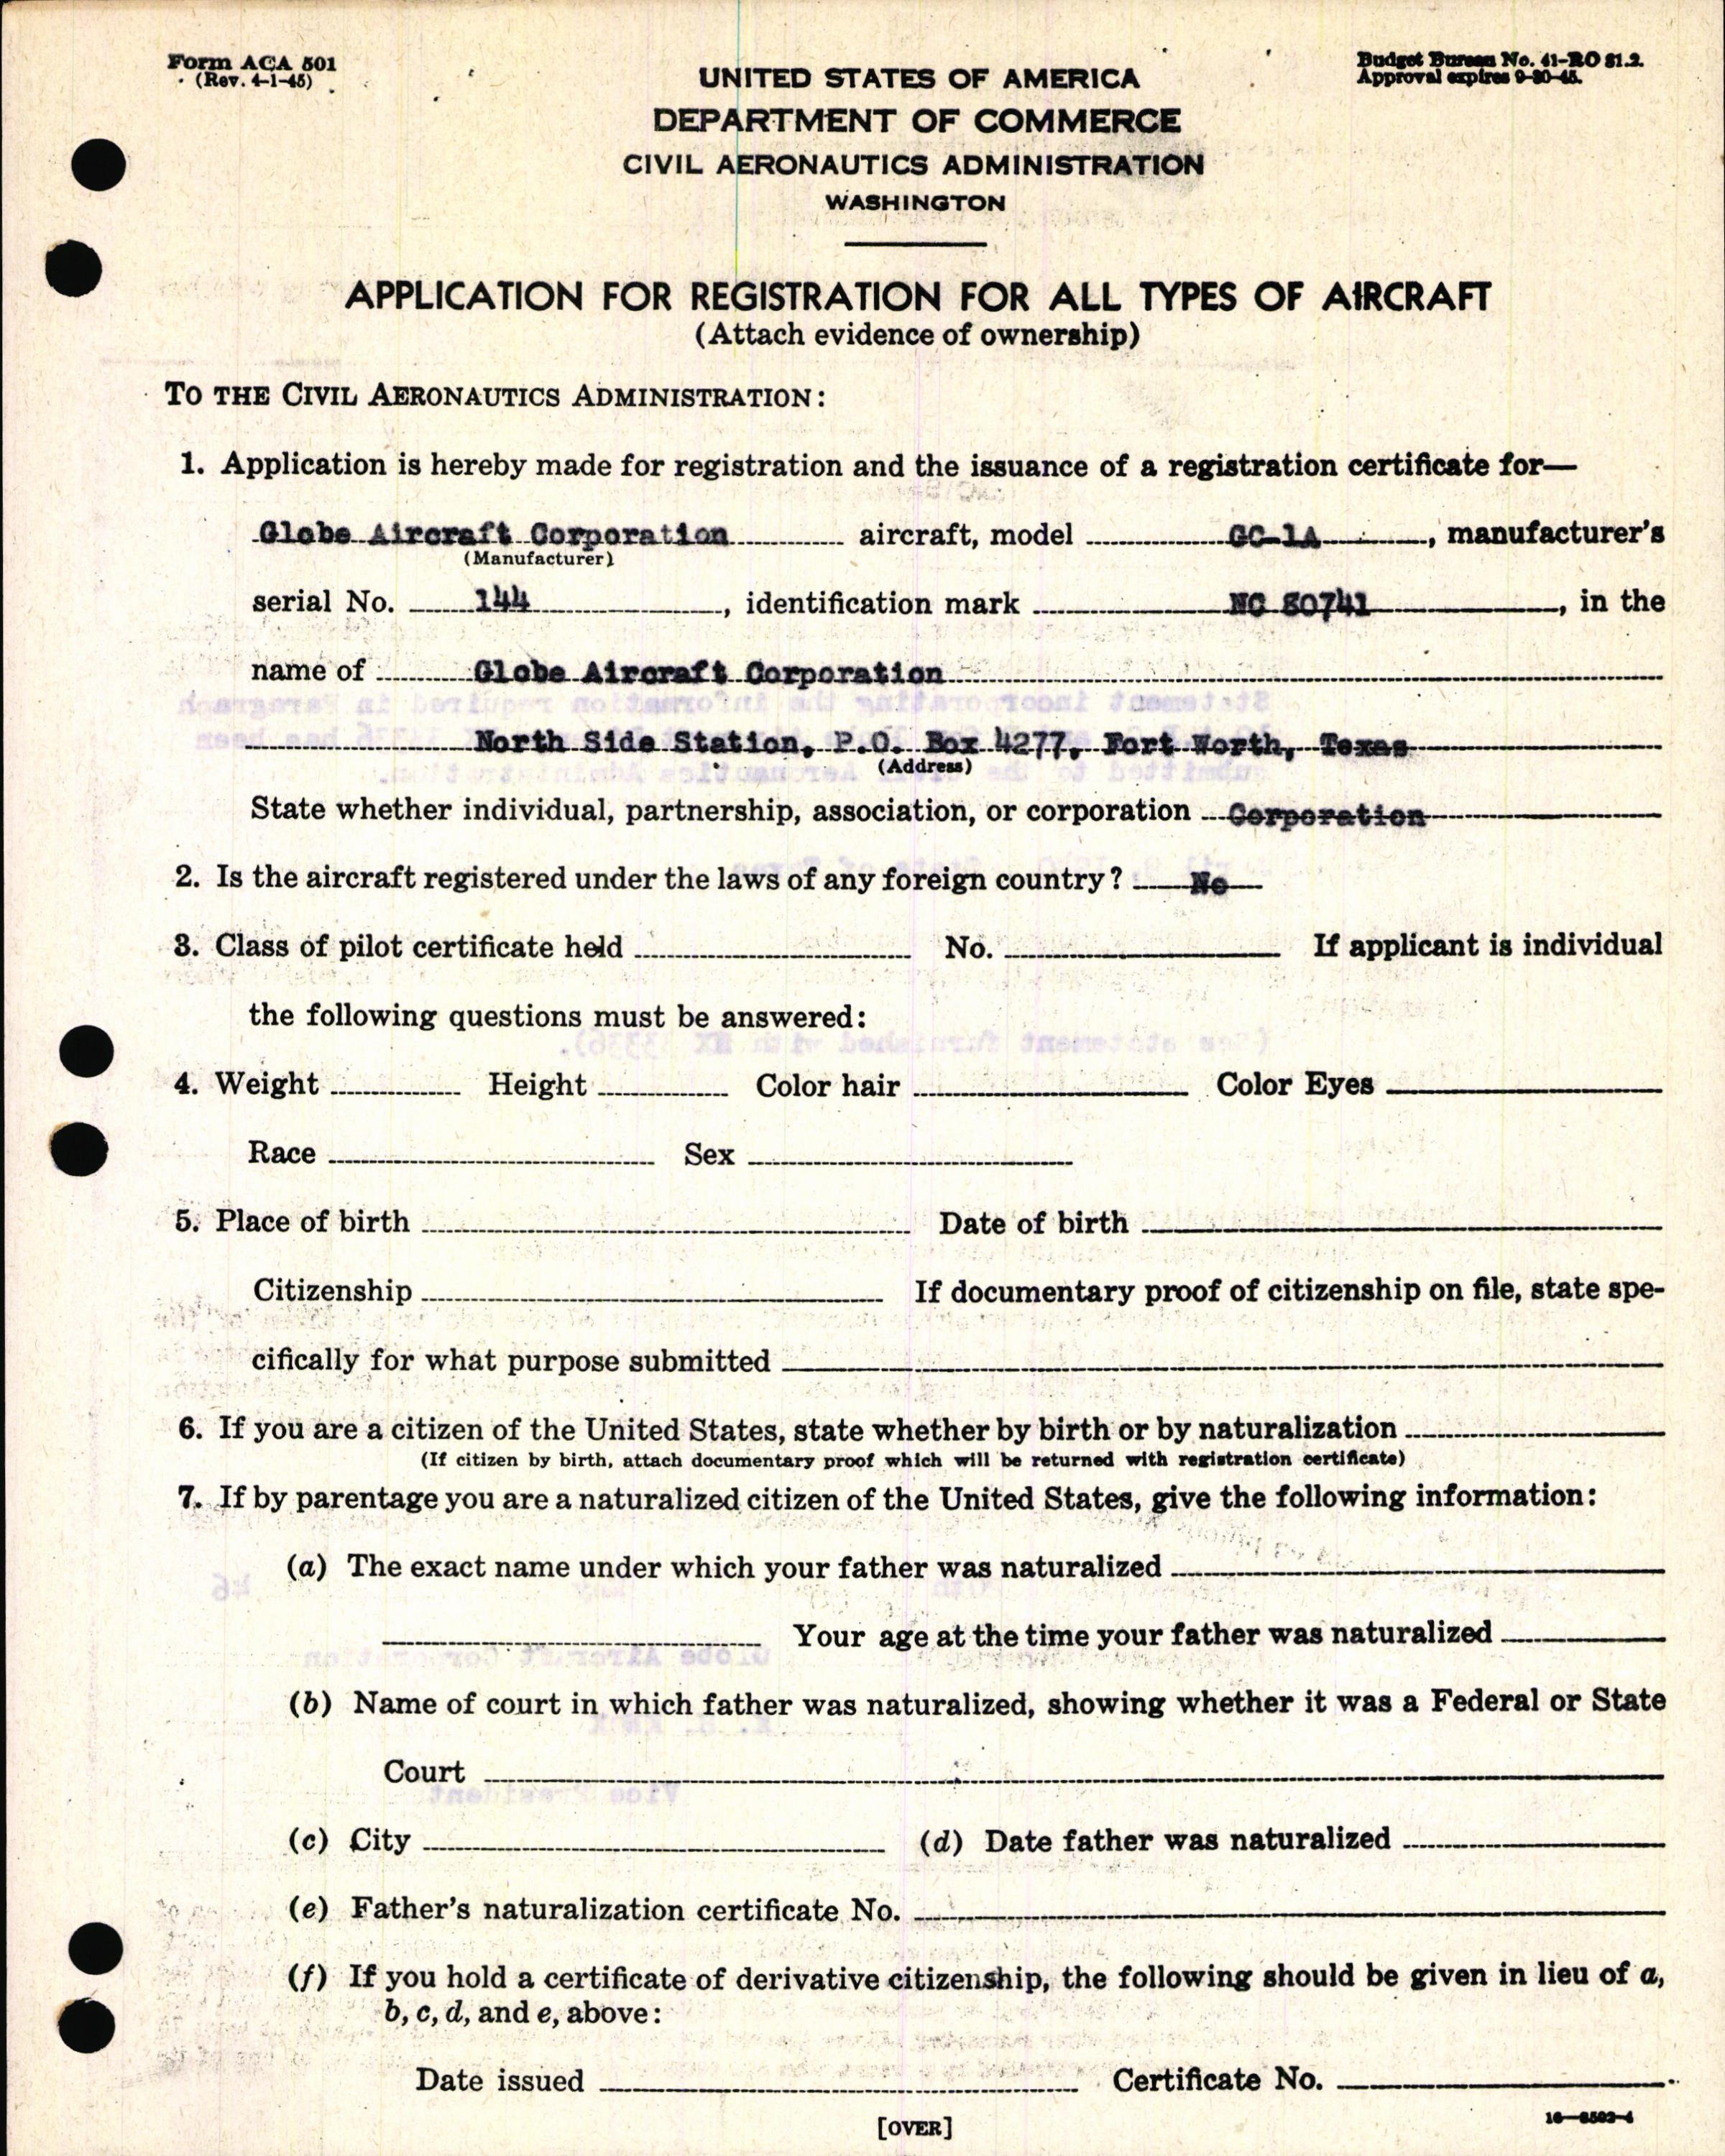 Sample page 5 from AirCorps Library document: Technical Information for Serial Number 144